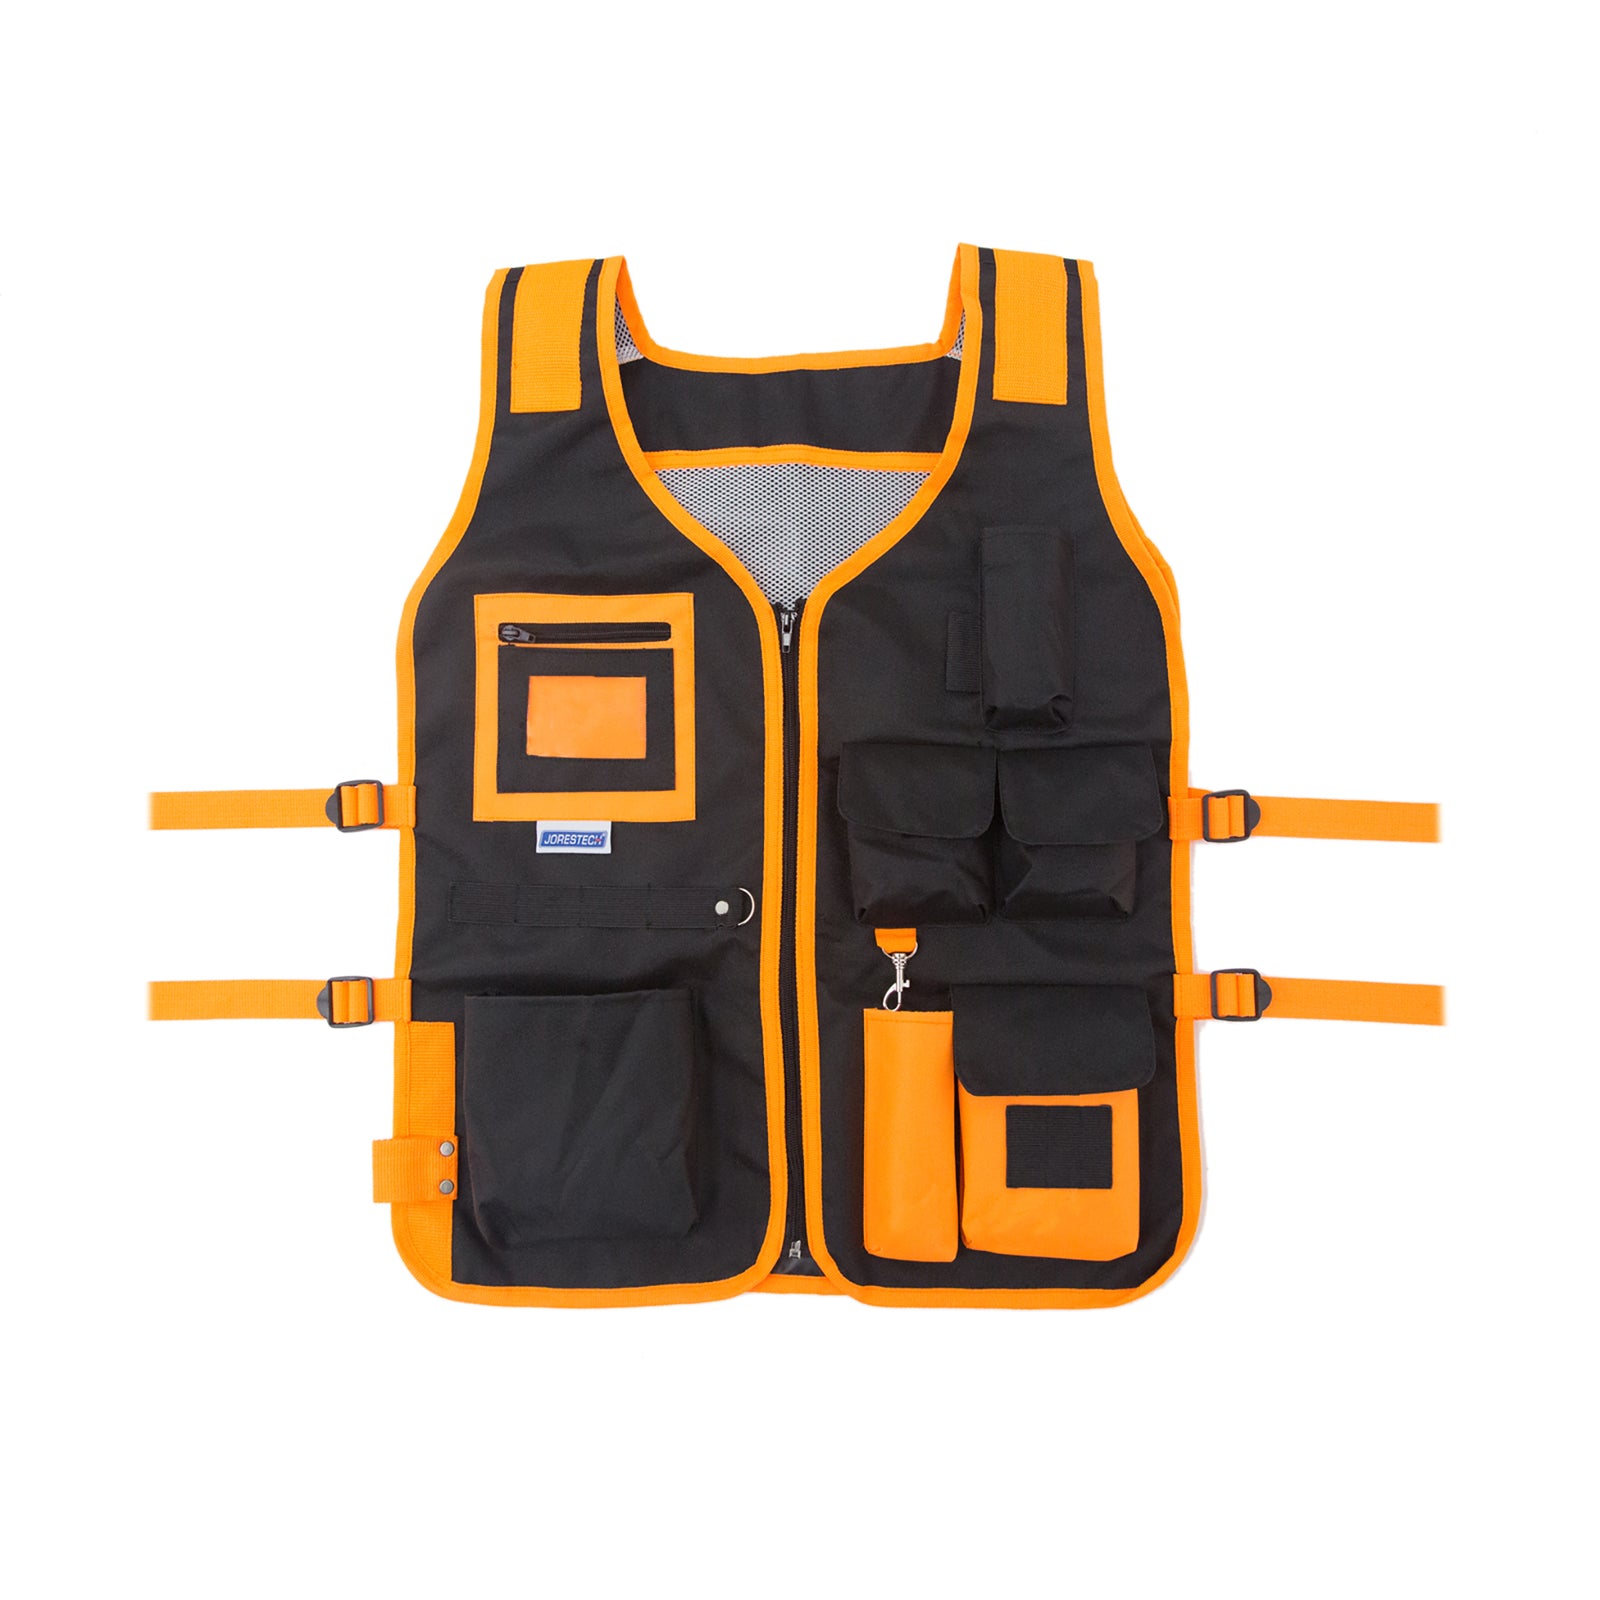 The black and orange high visibility size adjustable JORESTECH® tool vest with reflective strips and numerous pockets